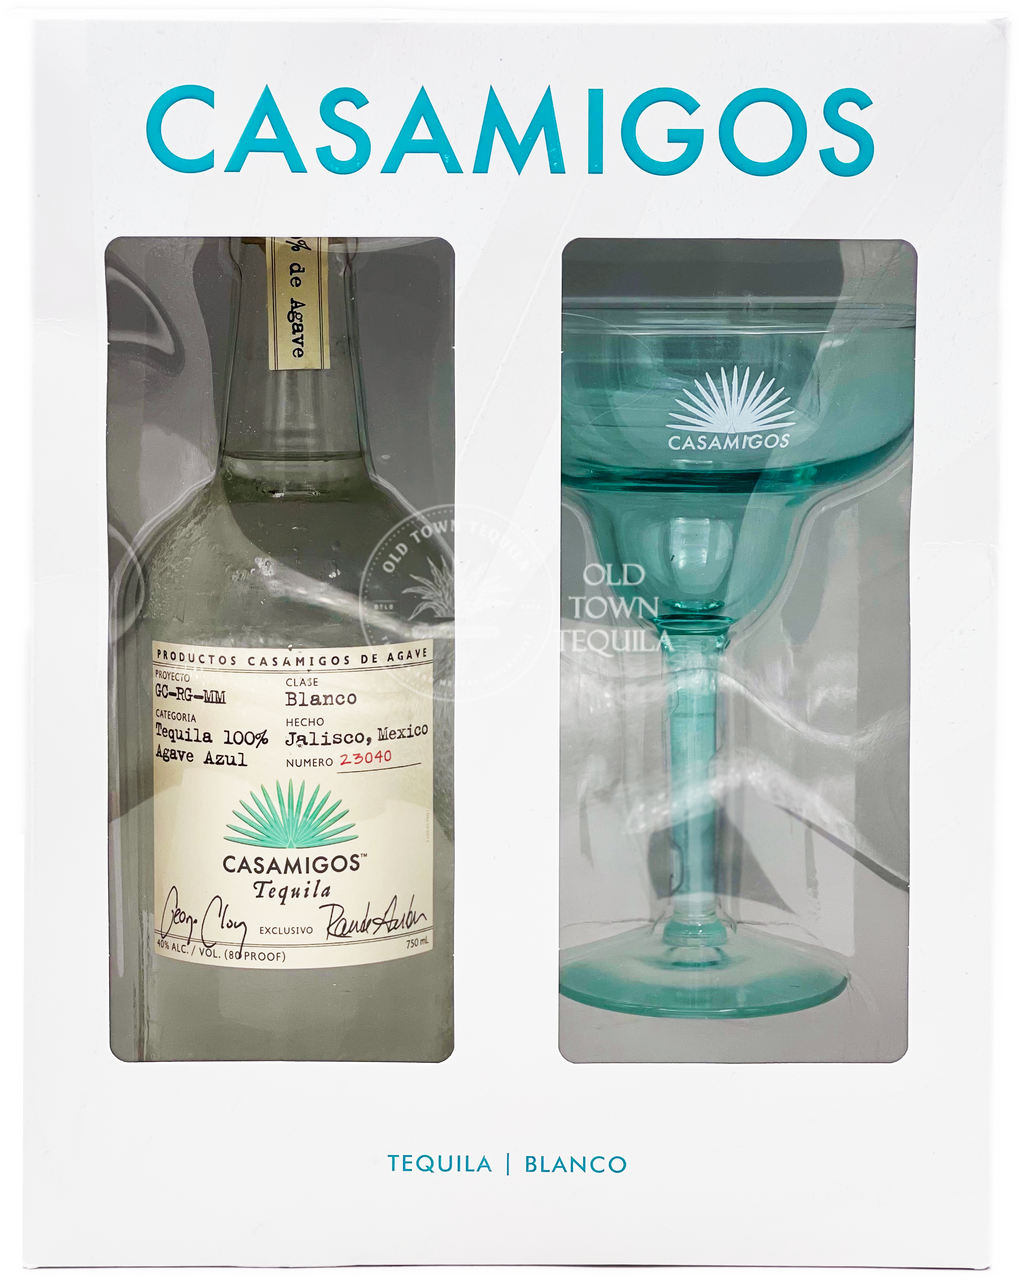 https://cdn11.bigcommerce.com/s-u9ww3di/images/stencil/1280x1280/products/11648/17226/casamigos_gift_set_blanco__33740.1653507403.png?c=2